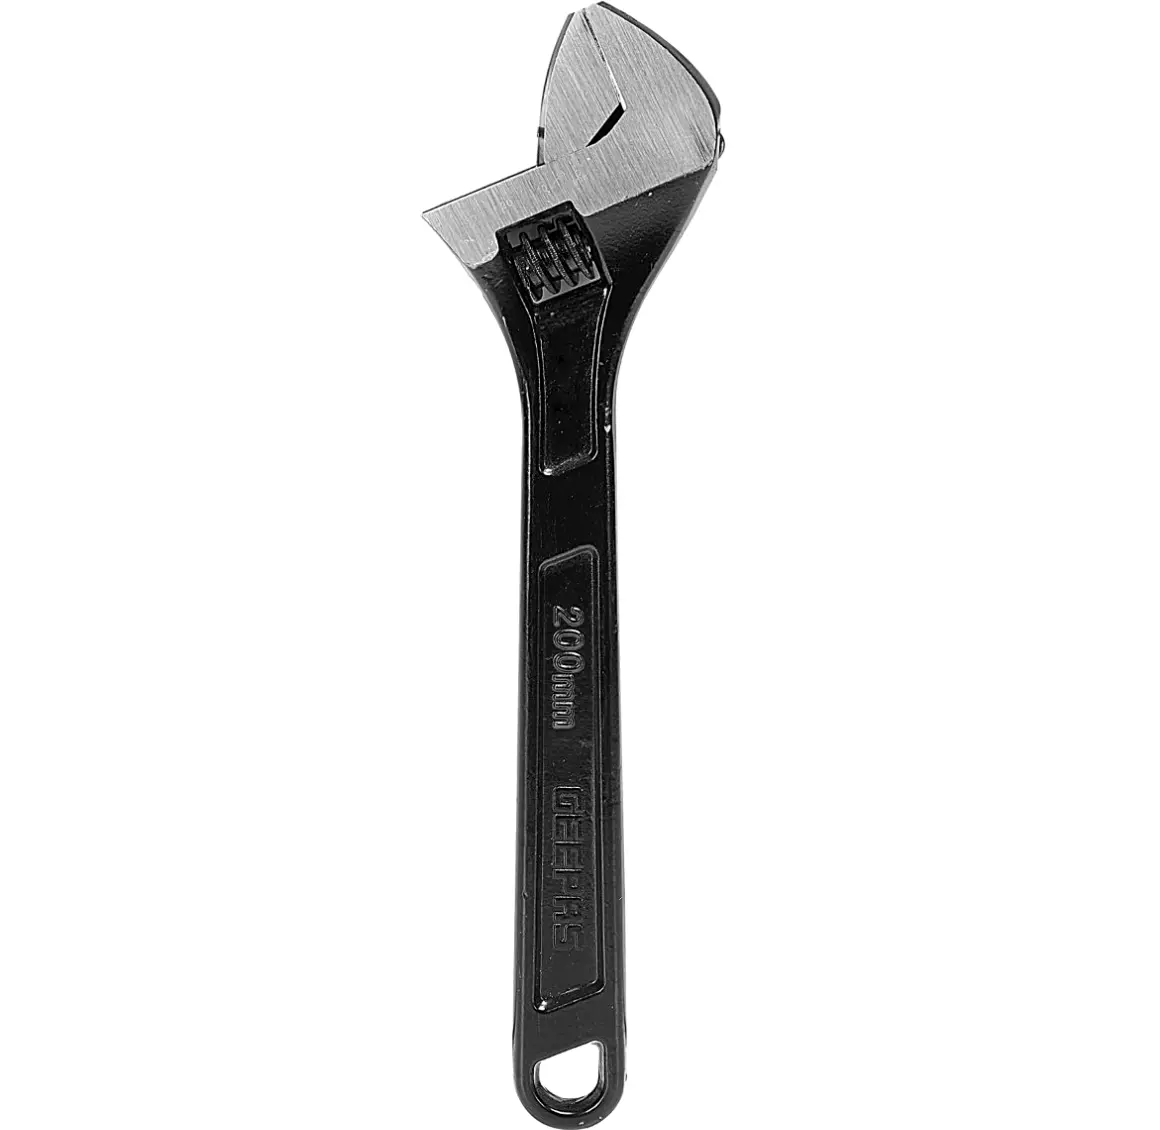 Geepas Adjustable Wrench Chrome 8 Inch Black GT59223